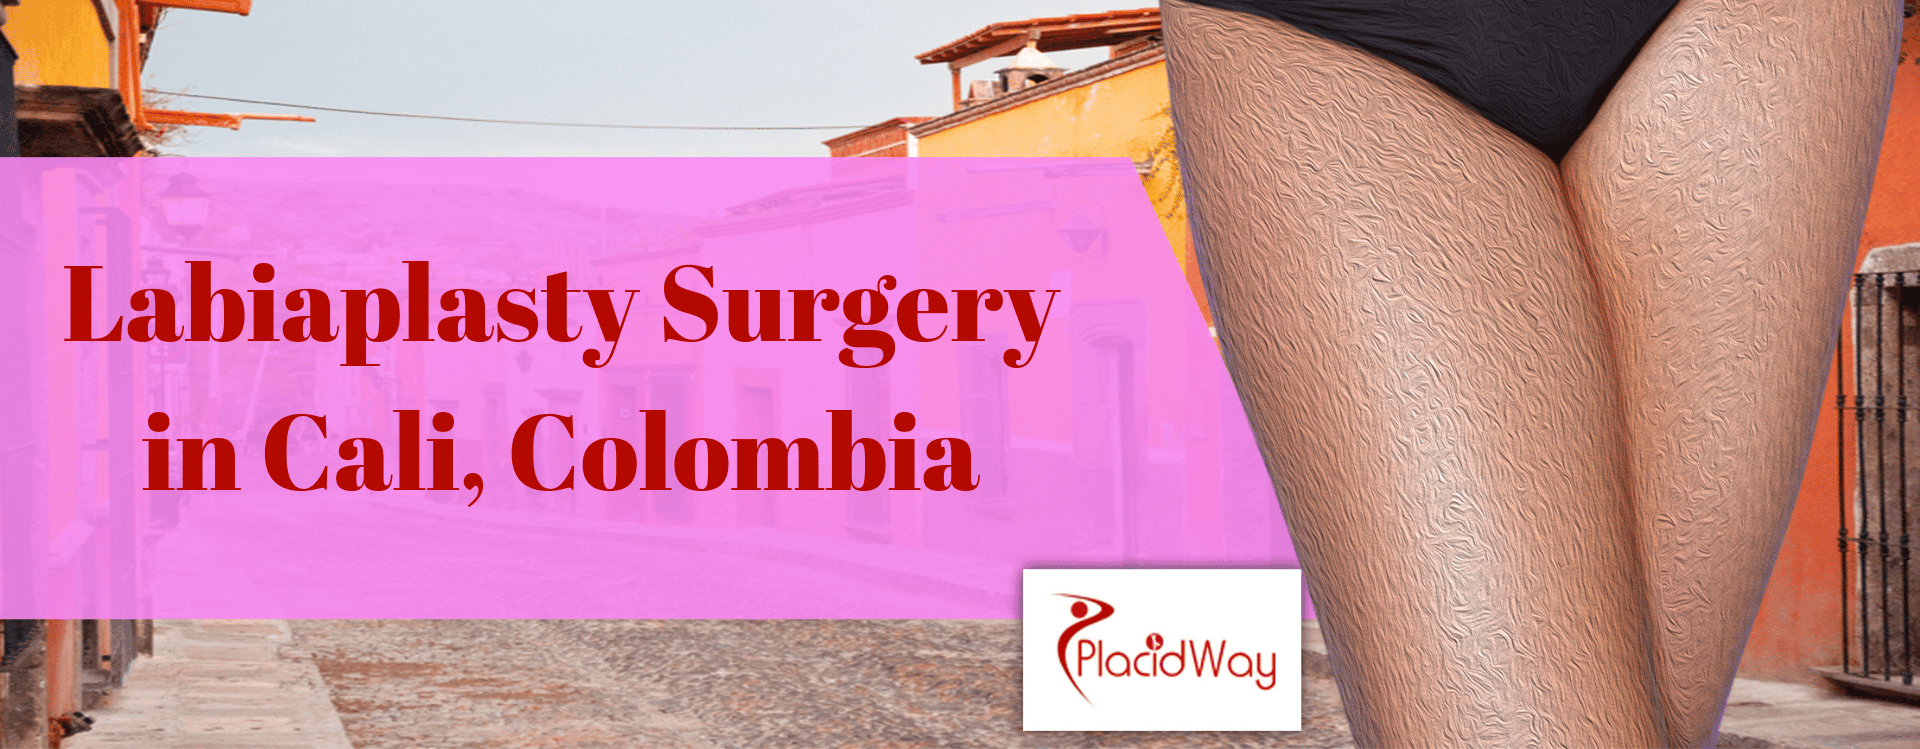 Labiaplasty in Cali, Colombia